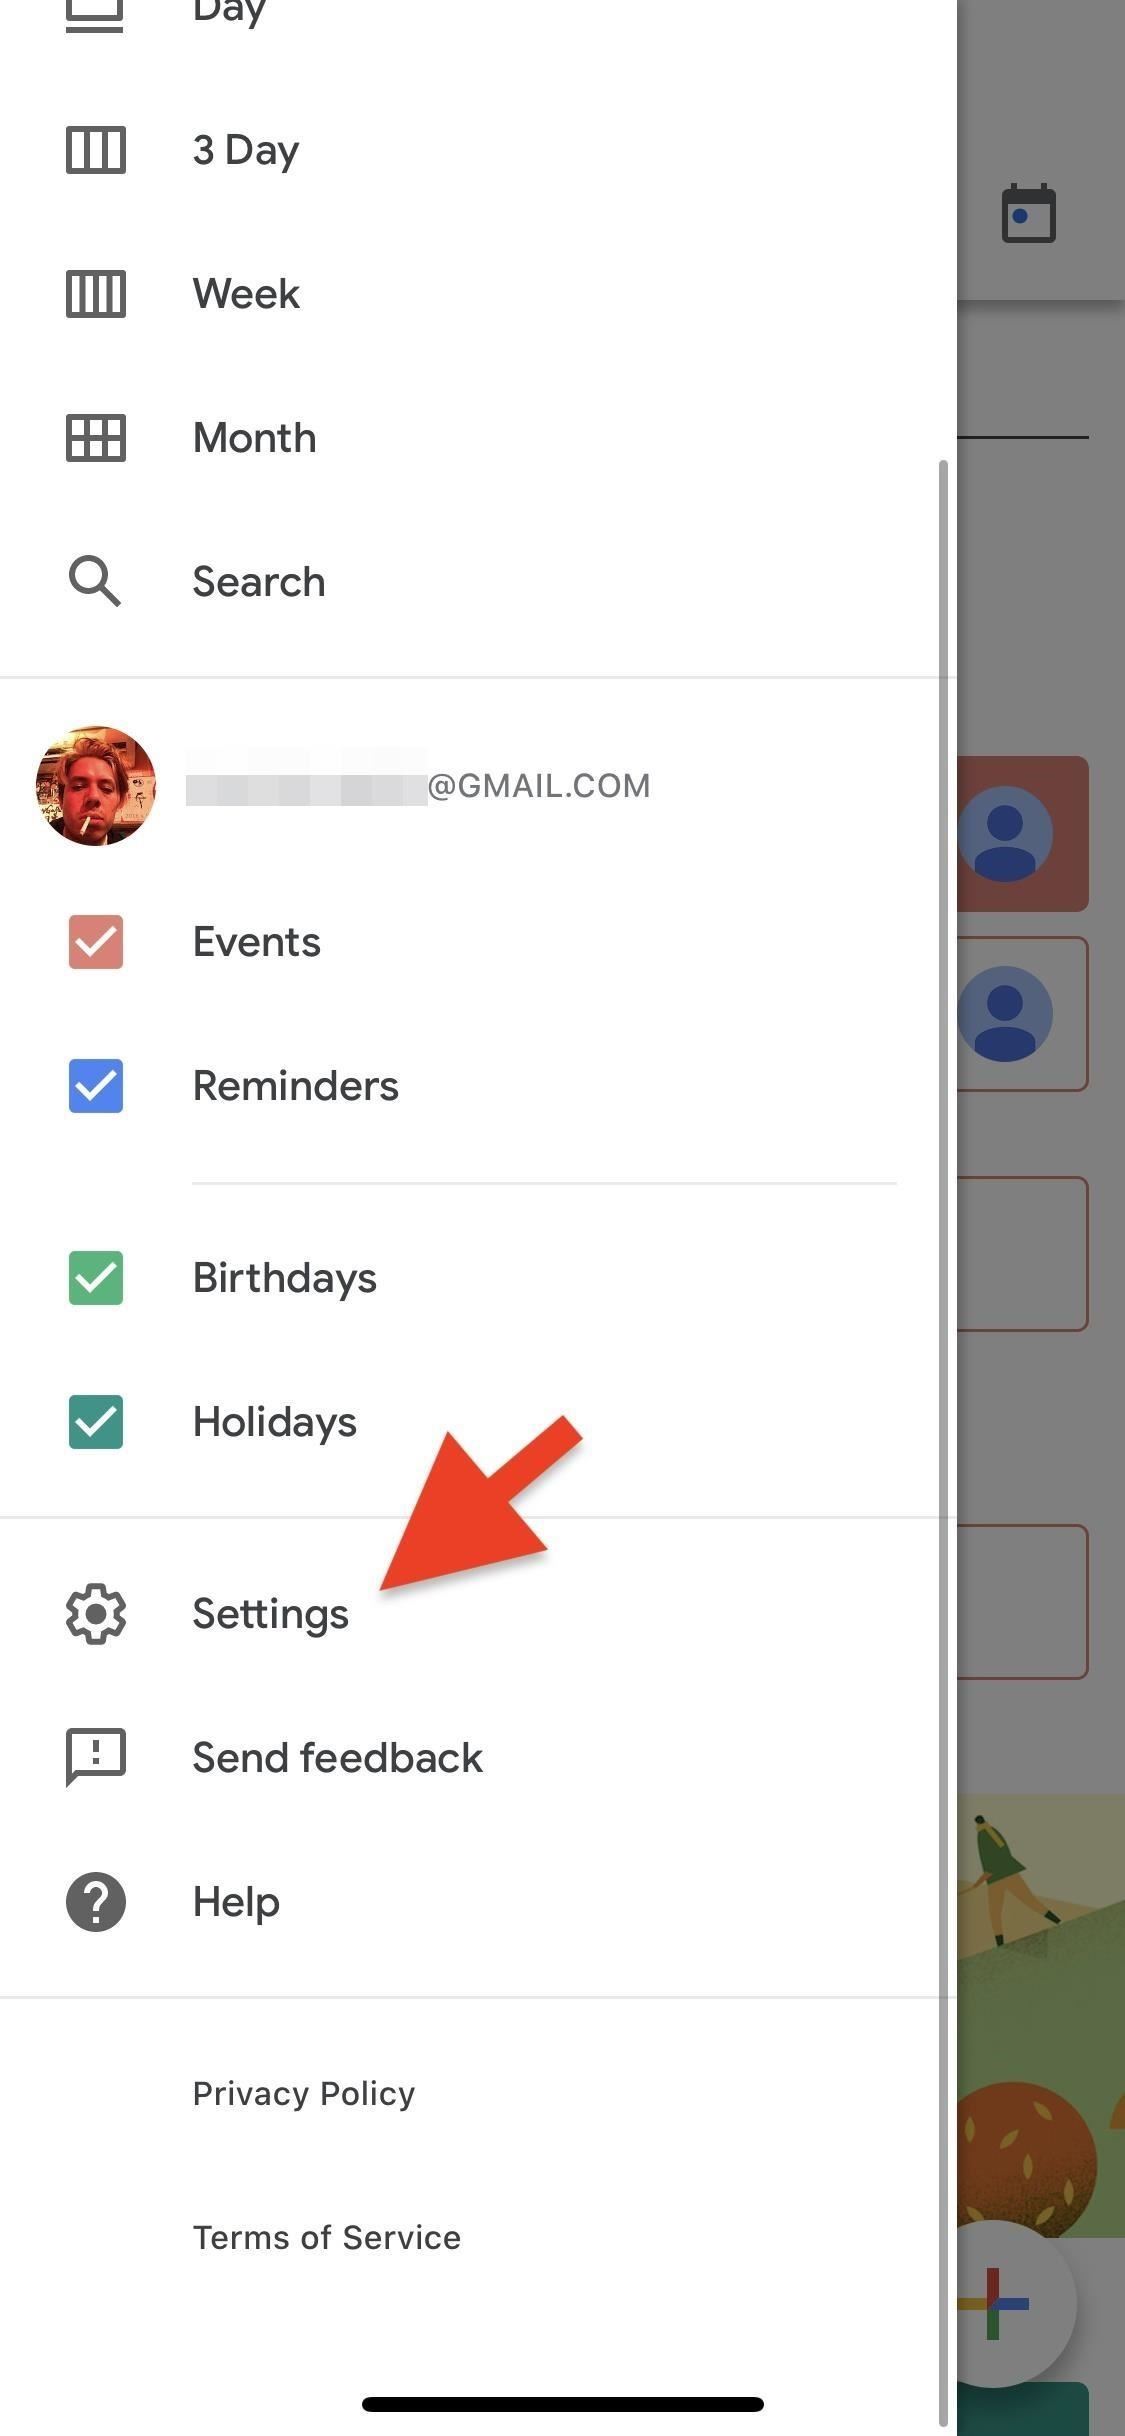 How to Import Apple Calendar Events into Google Calendar on iPhone or Android